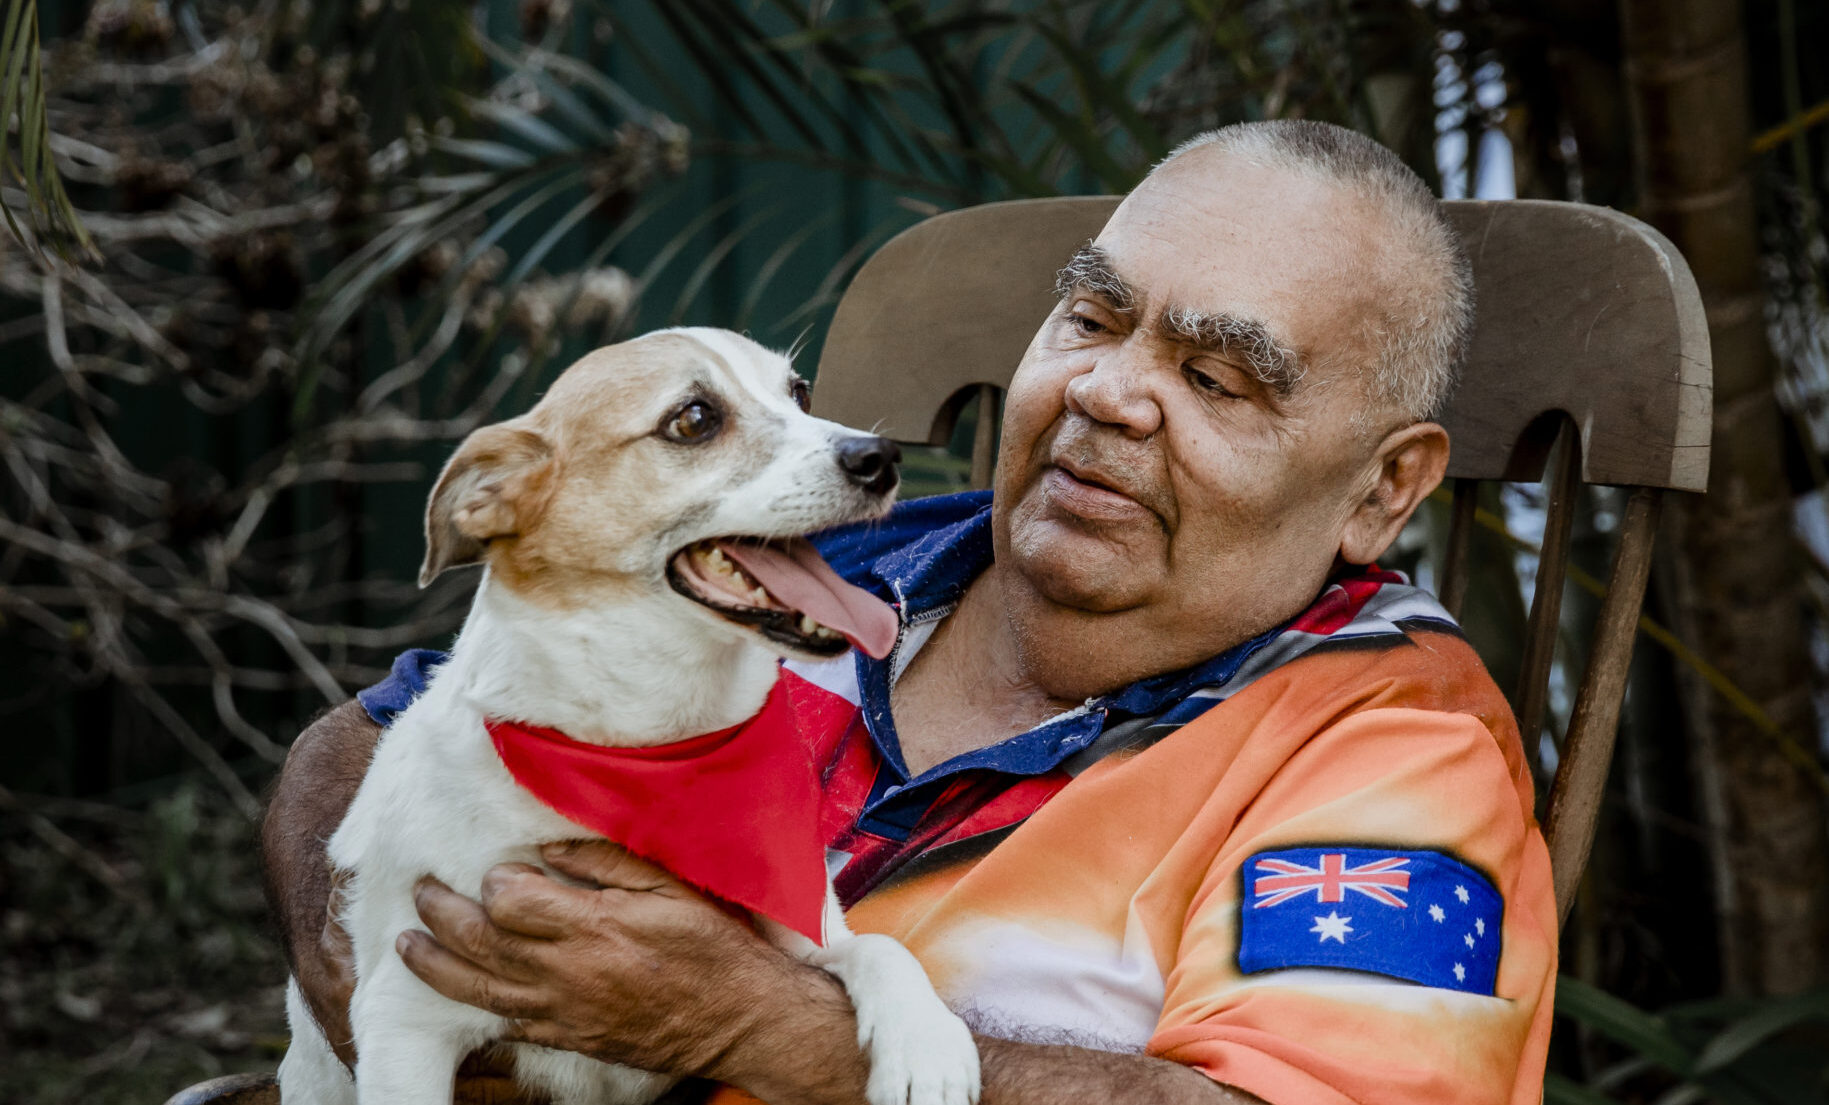 JP_6001-scaled-e1718960783536 | RSL LifeCare - provide care and service to war veterans, retirement villages and accommodation, aged care services and assisted living